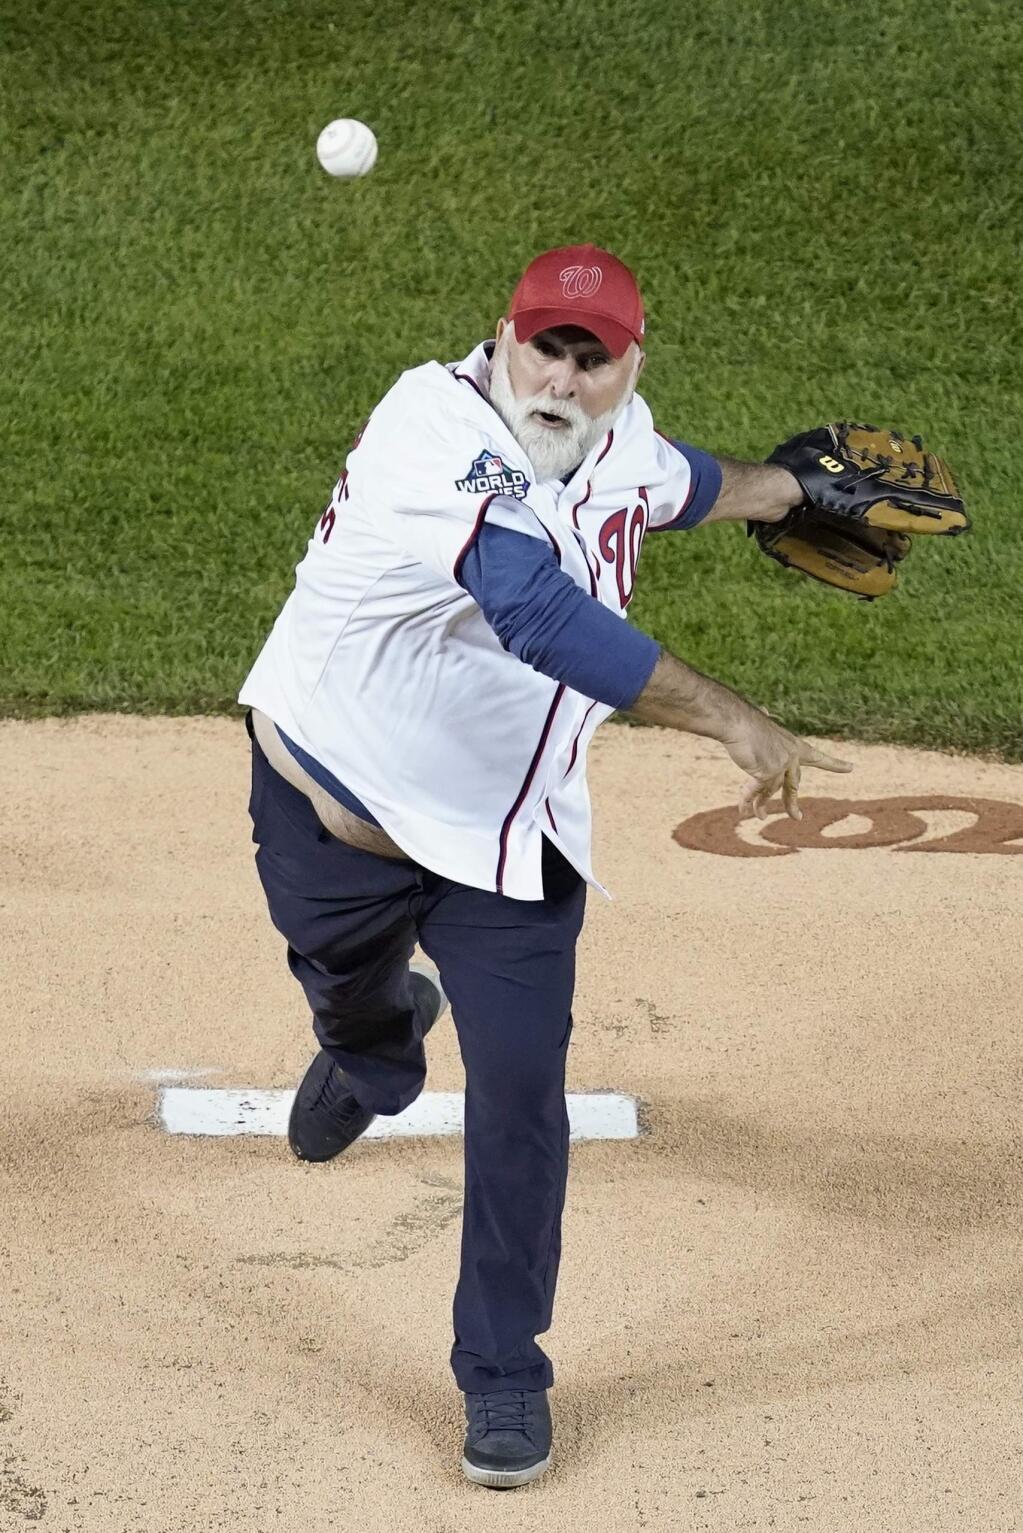 Chef José Andrés throws a ceremonial first pitch before Game 5 of the baseball World Series between the Houston Astros and the Washington Nationals Sunday, Oct. 27, 2019, in Washington. (AP Photo/Pablo Martinez Monsivais)